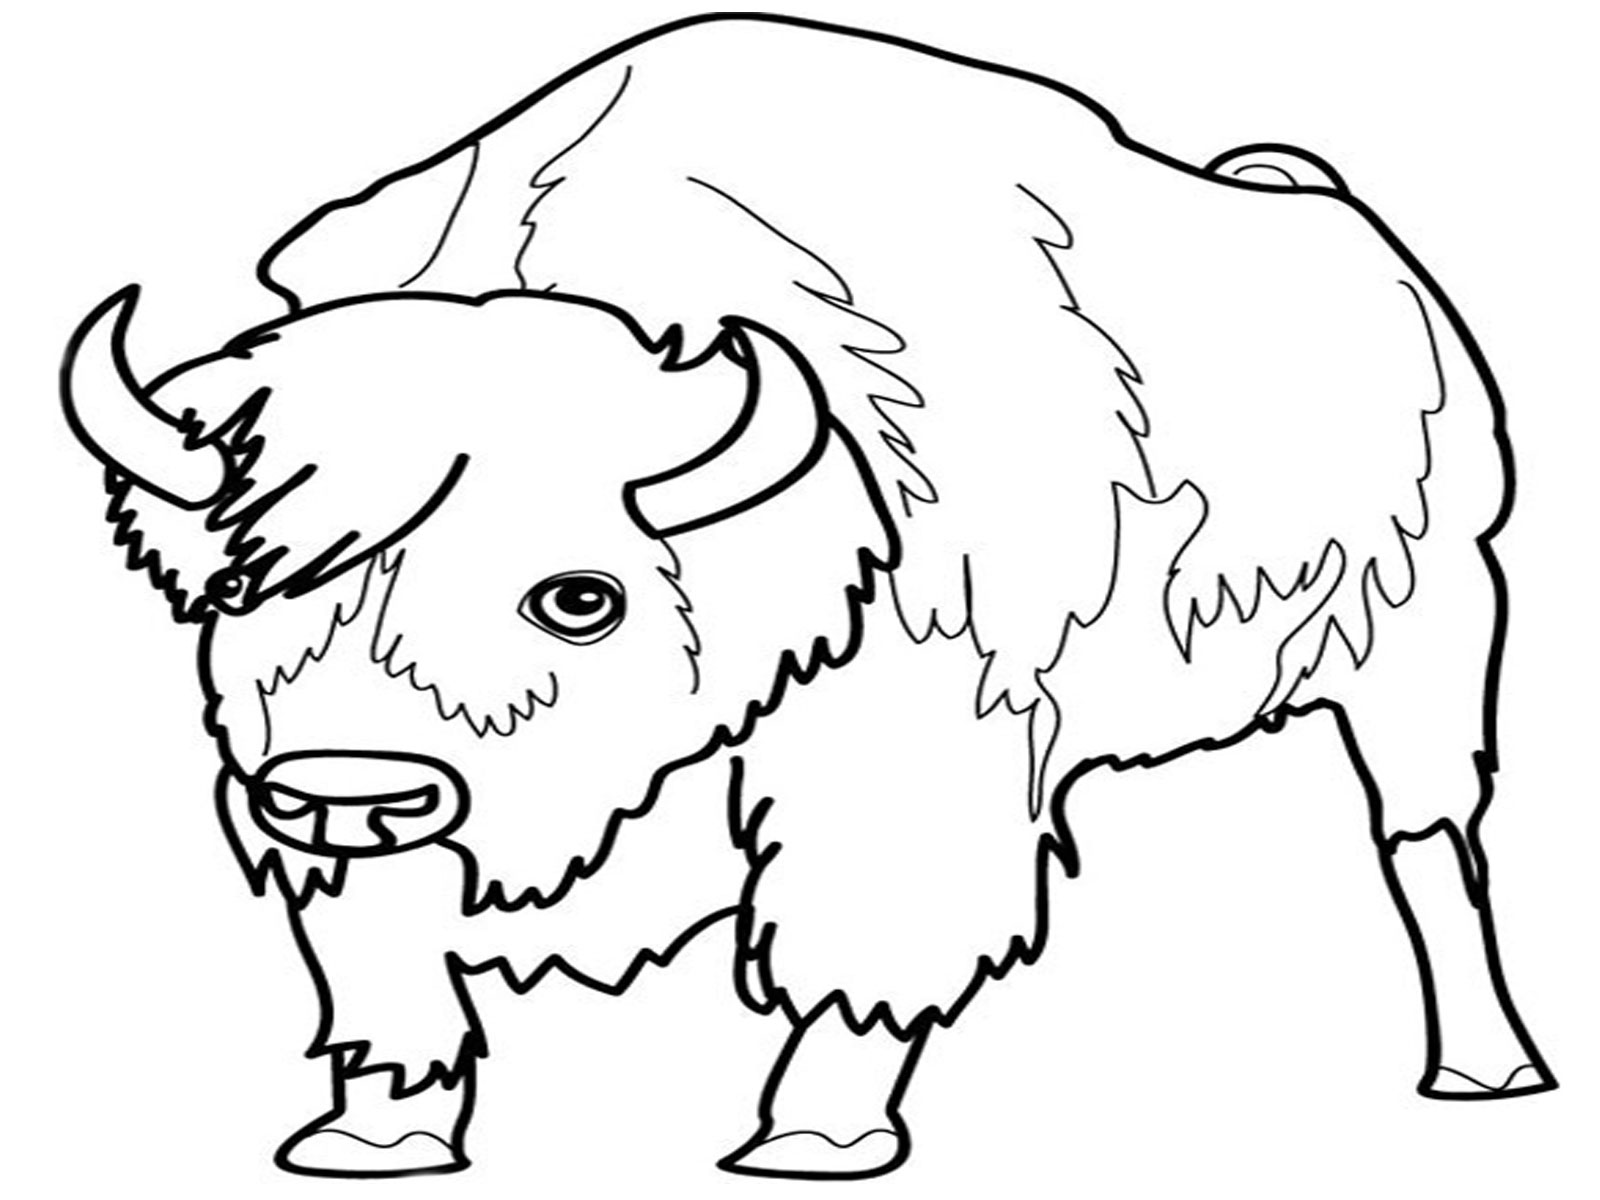 land animals coloring pages Gallery